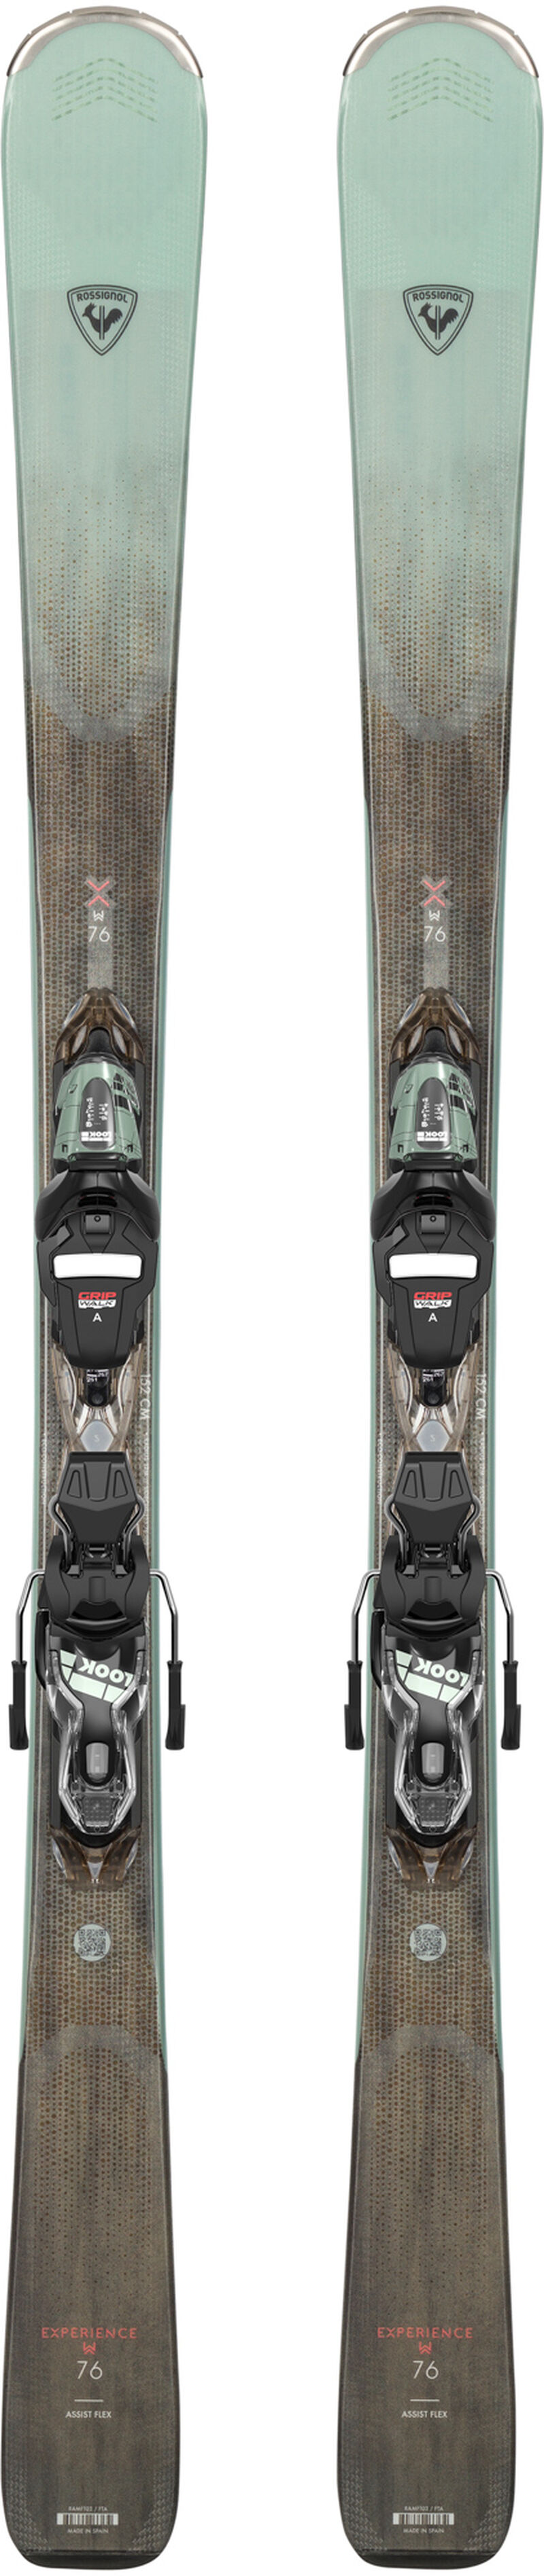 Rossignol Skis All Mountain femme EXPERIENCE W 76 (XPRESS) 